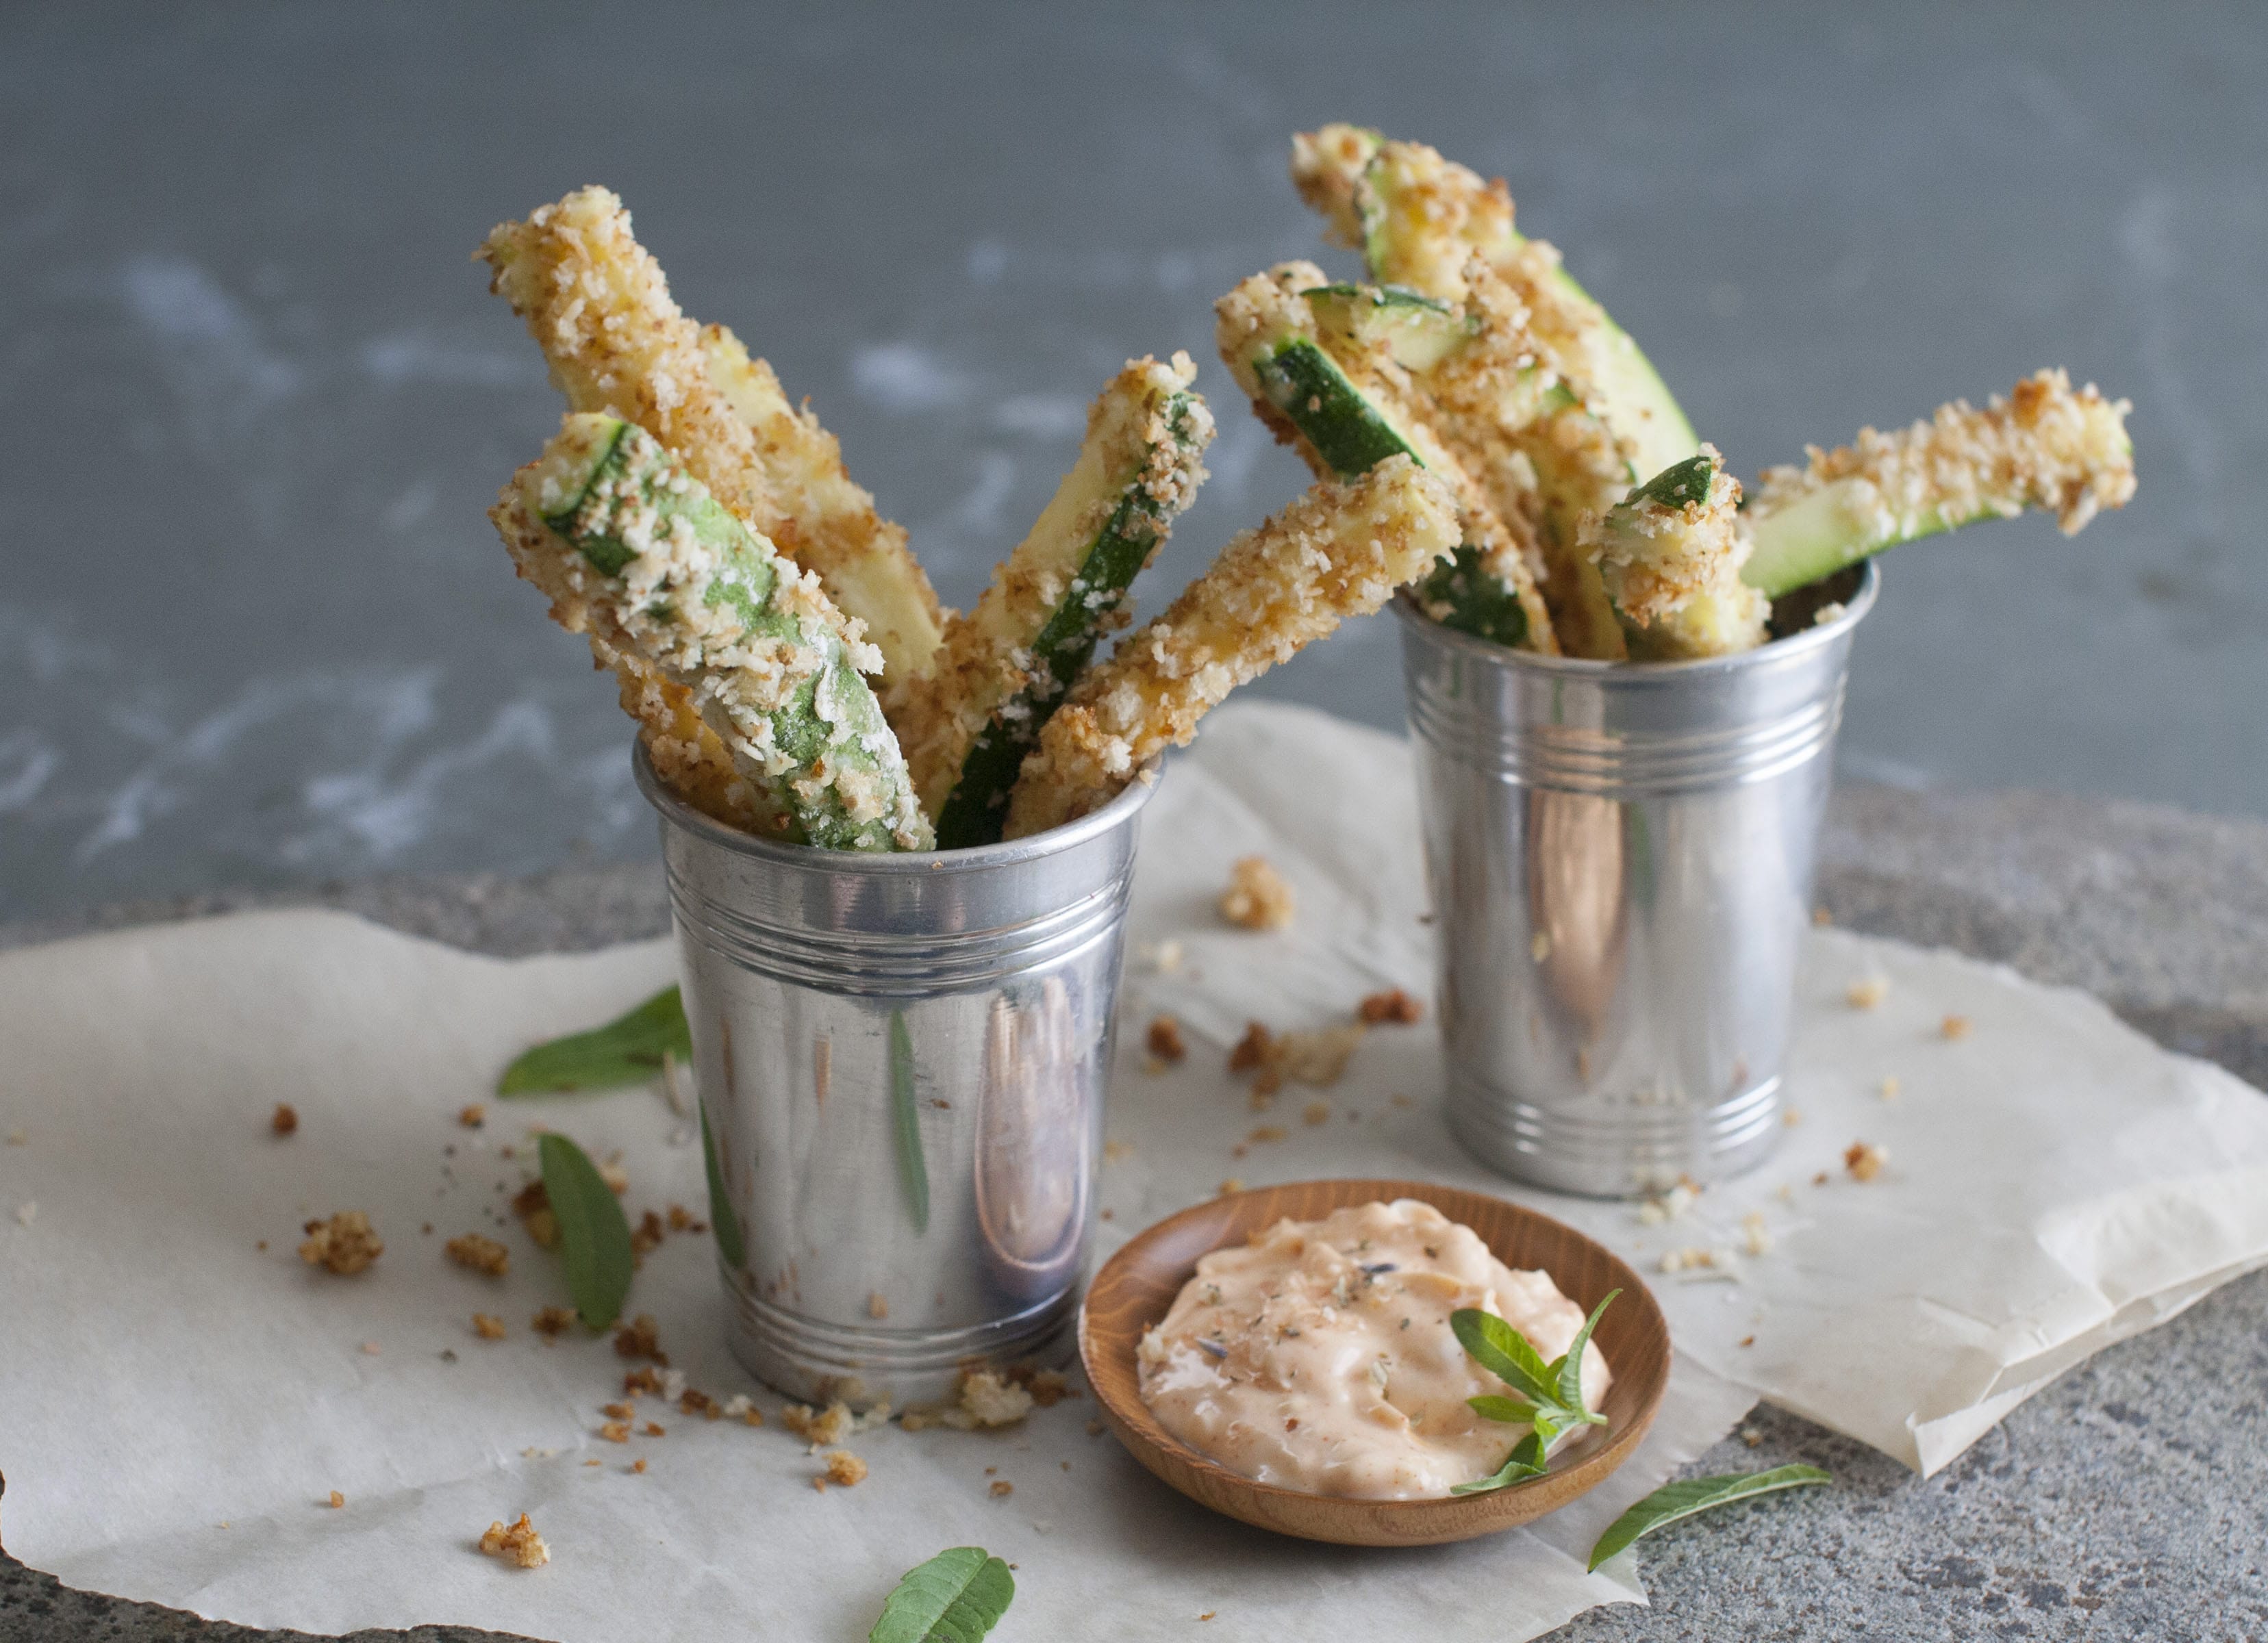 Cheesy Zucchini Fries With Paprika Dipping Sauce